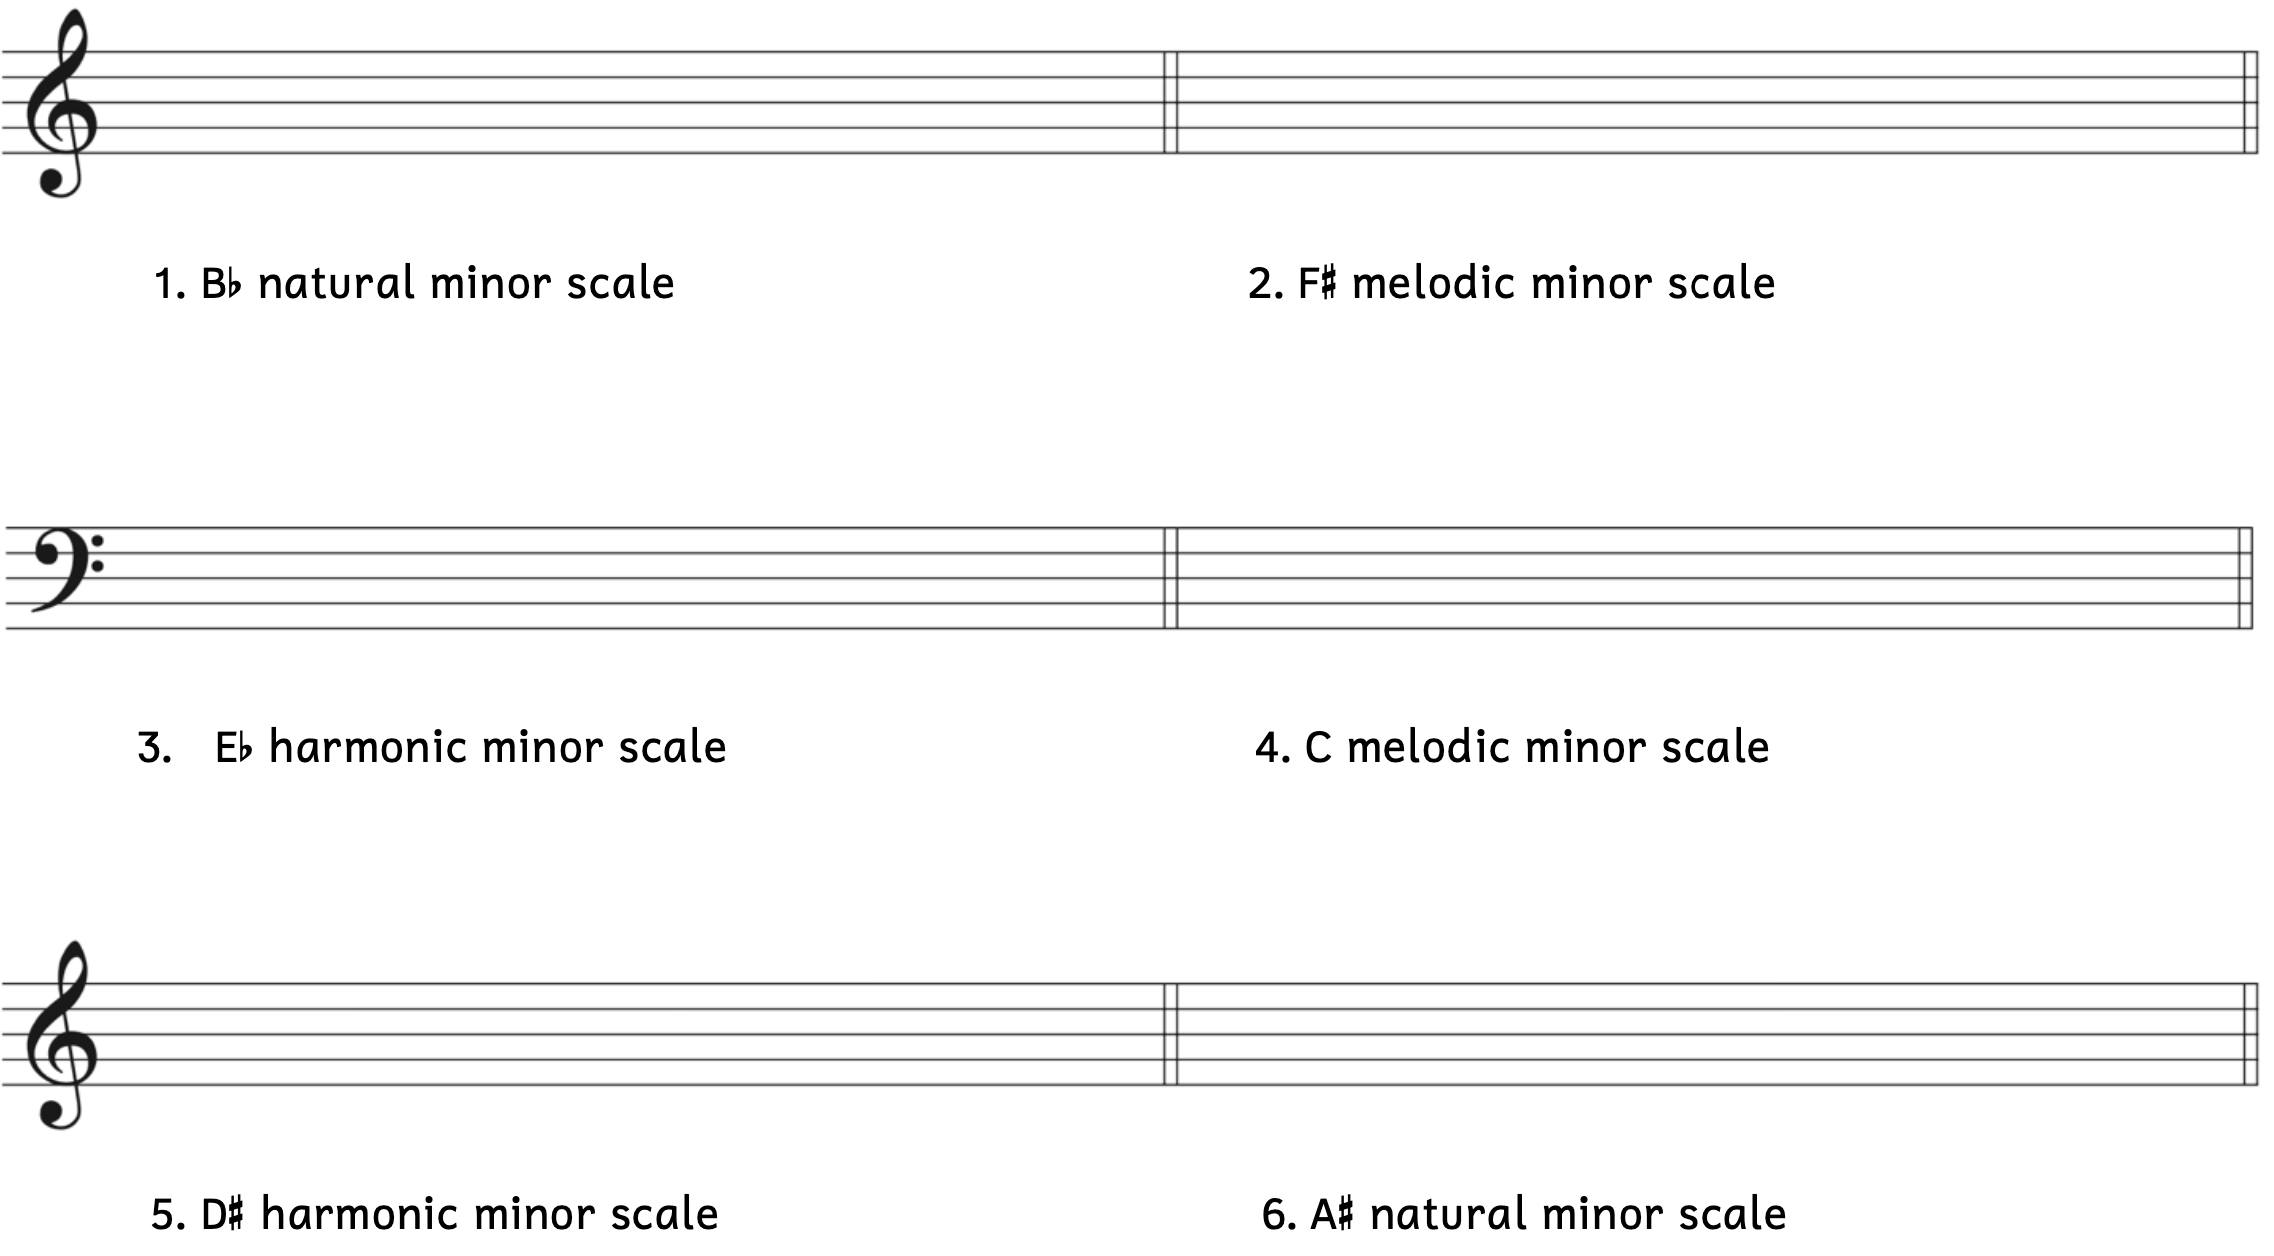 Discover Harmonic, Natural, and Melodic Minor Scales for Piano